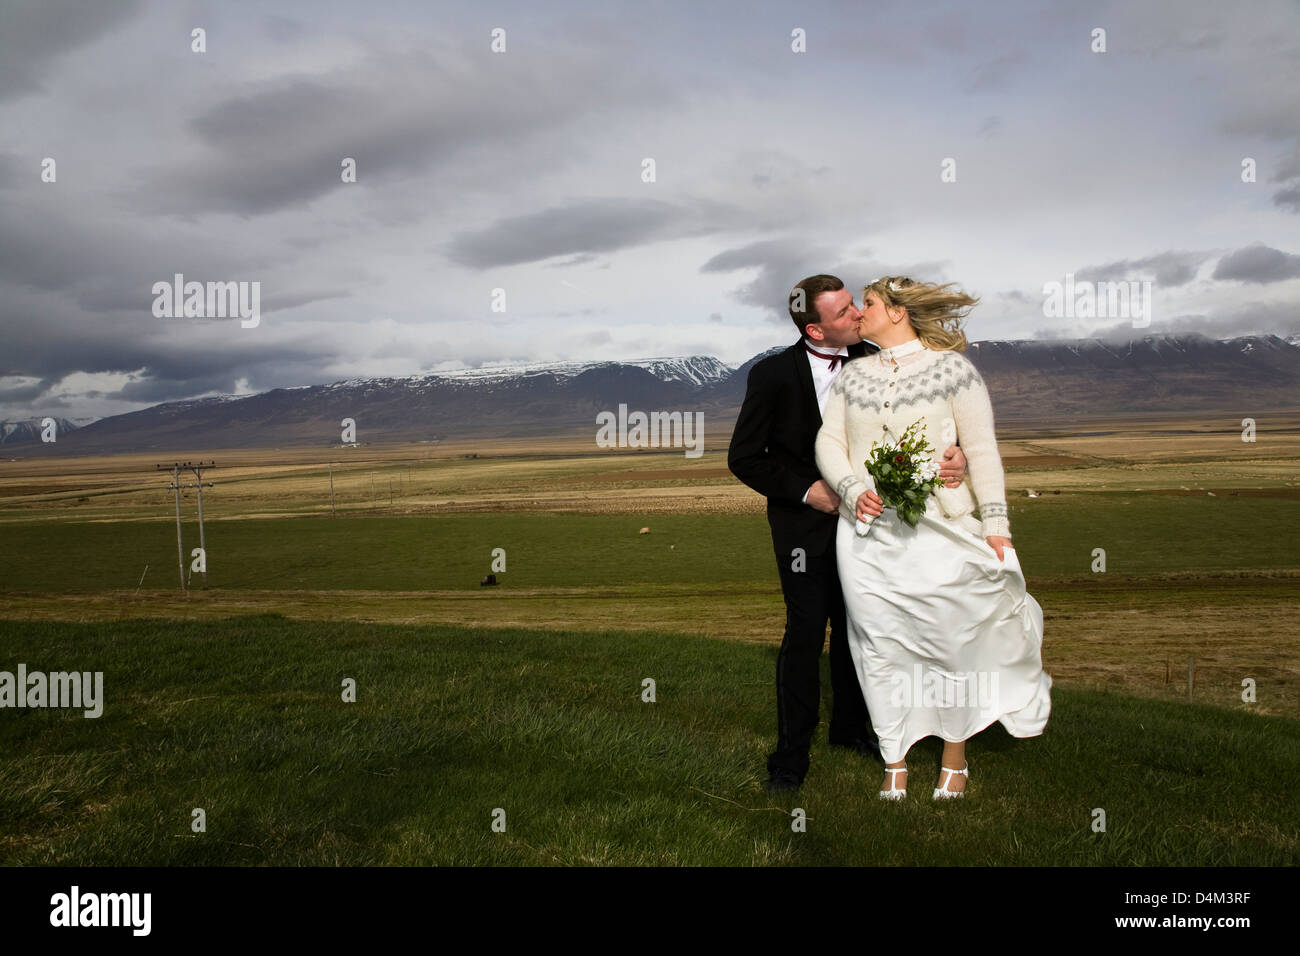 Newlywed couple kissing in rural field Banque D'Images